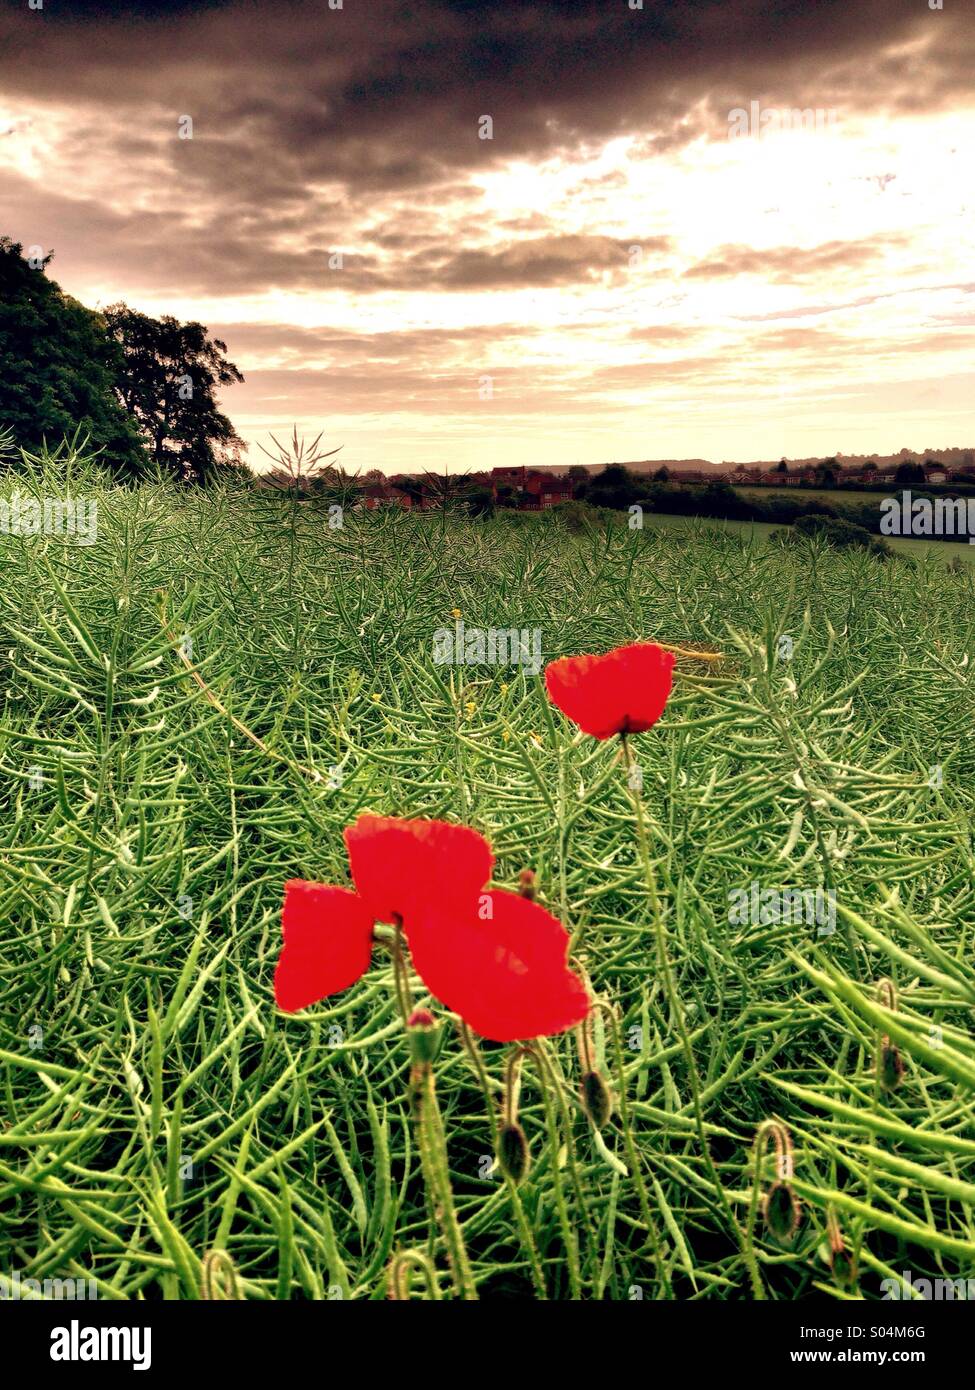 Poppies in a crop field, England Stock Photo